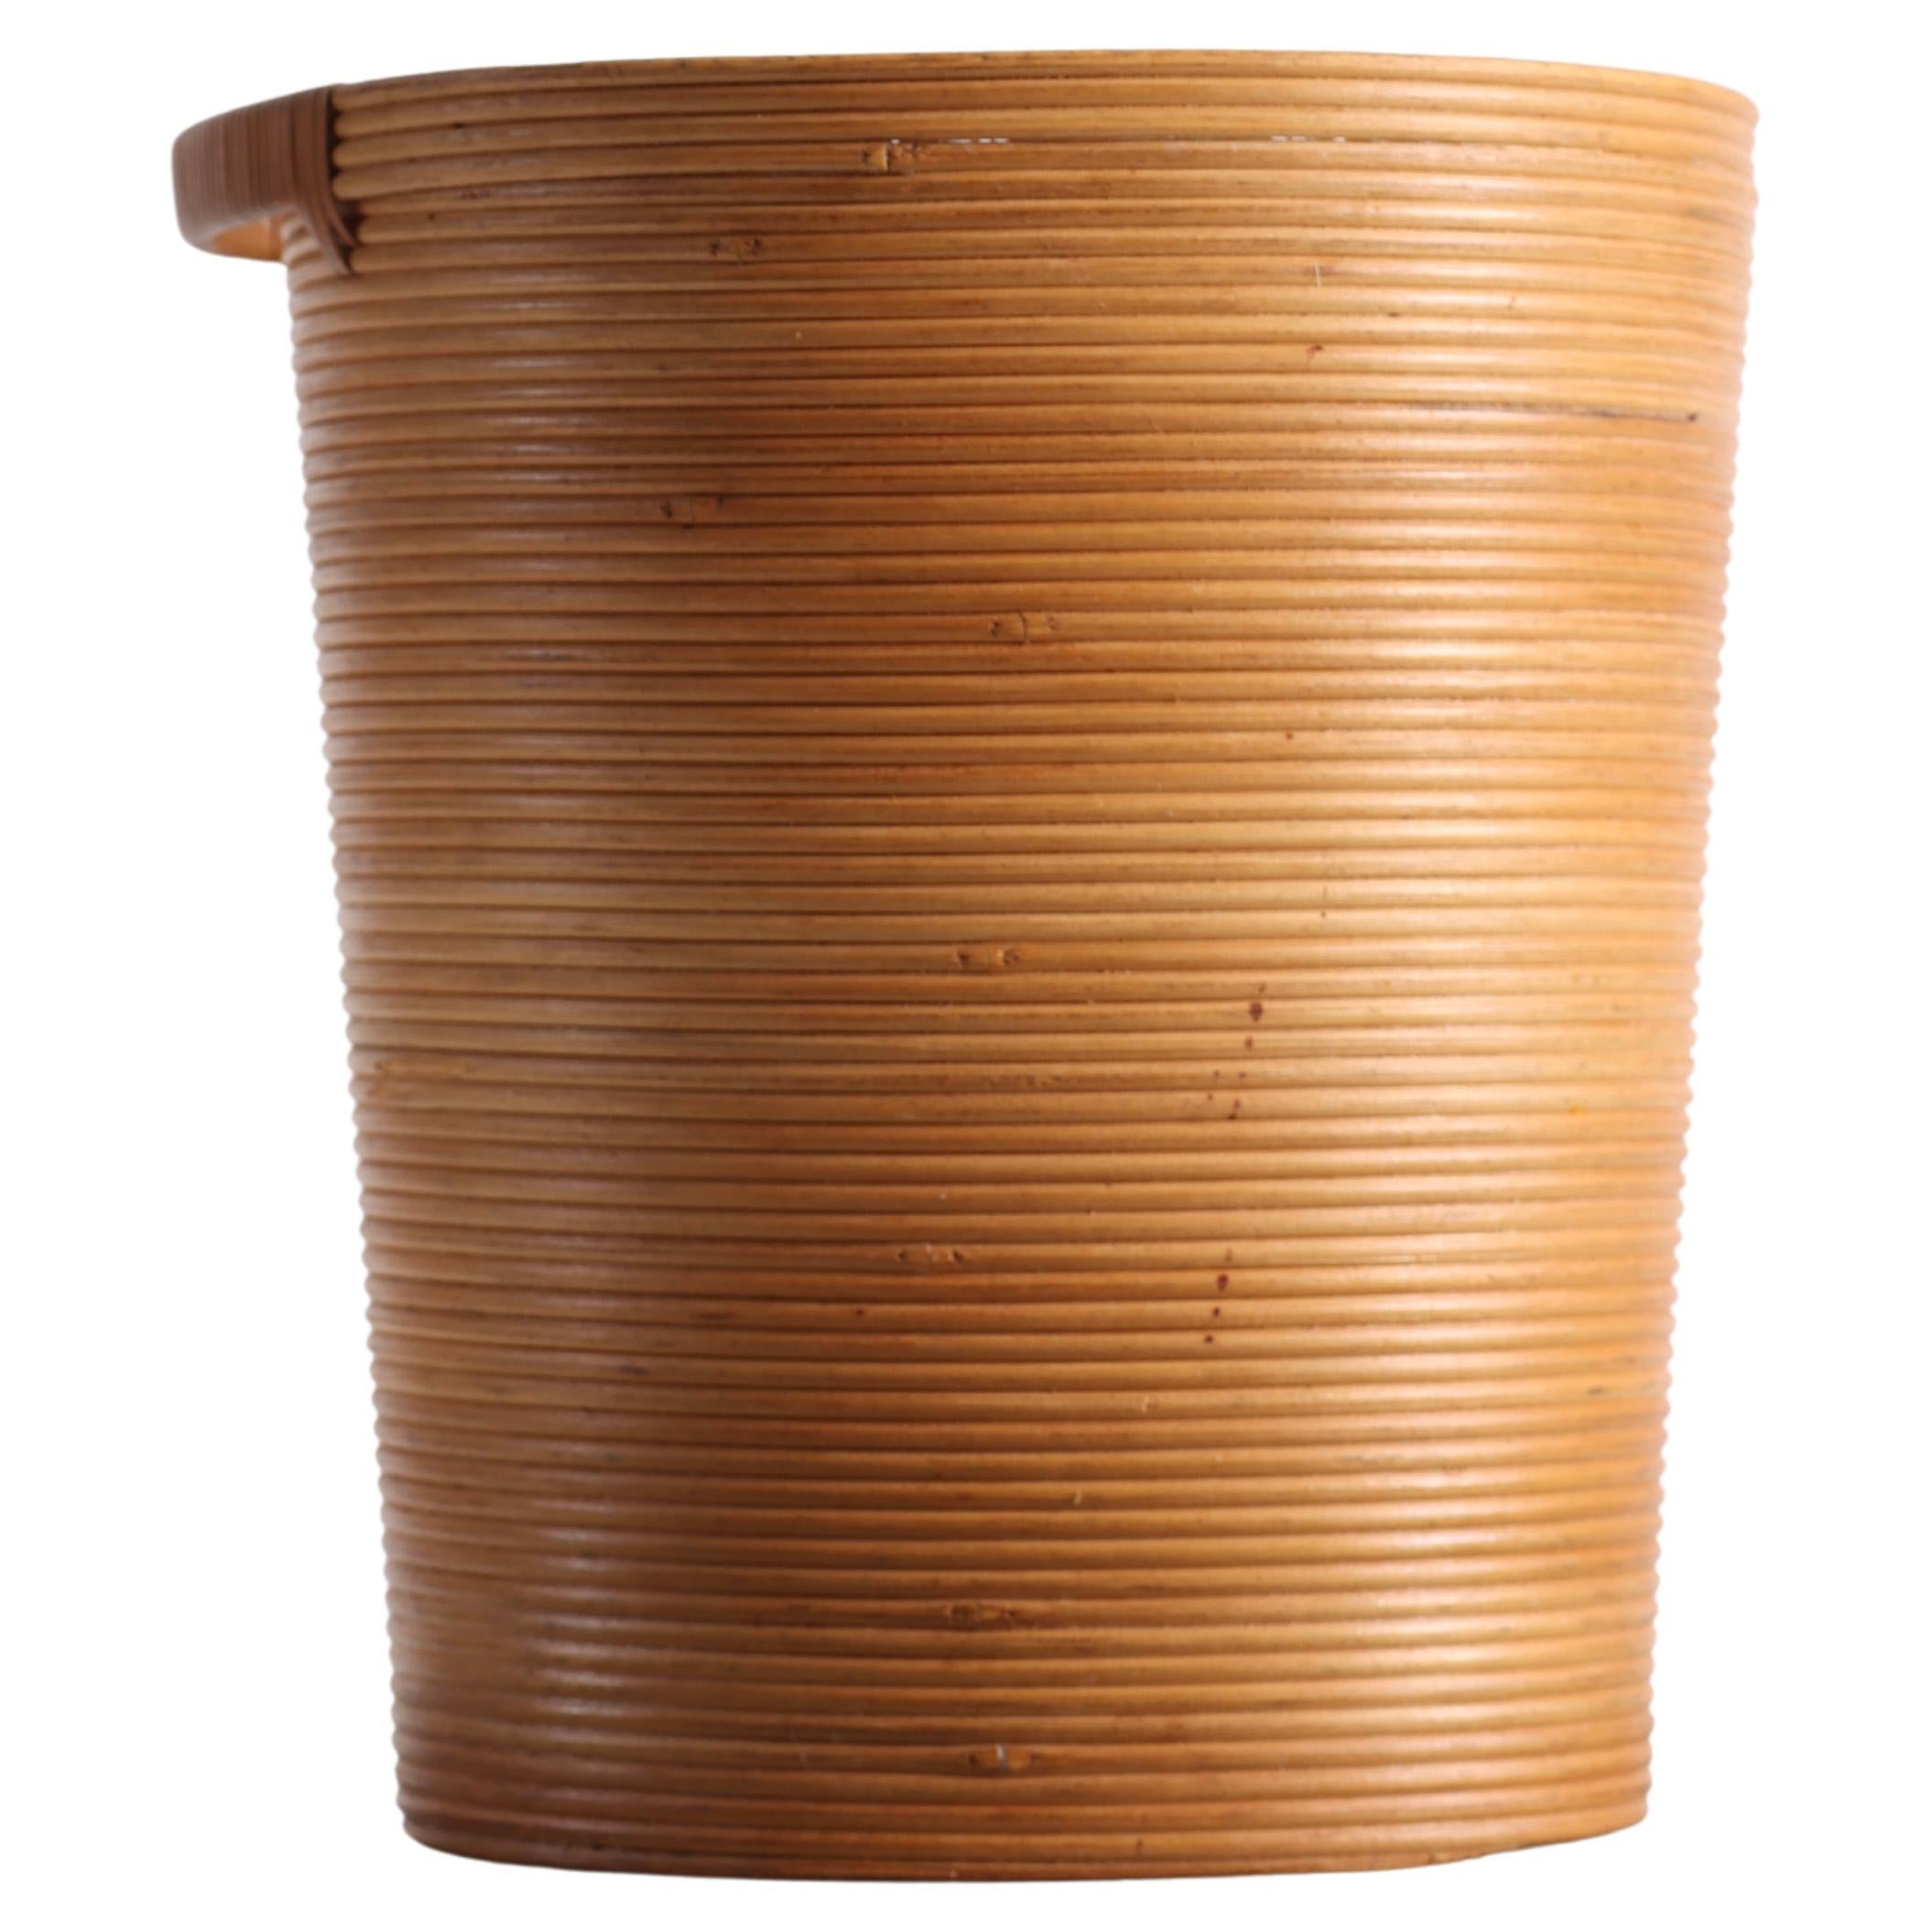 Rare Midcentury Waste Bin in Bamboo, by Lauritz Lønborg, Made in Denmark, 1950s For Sale